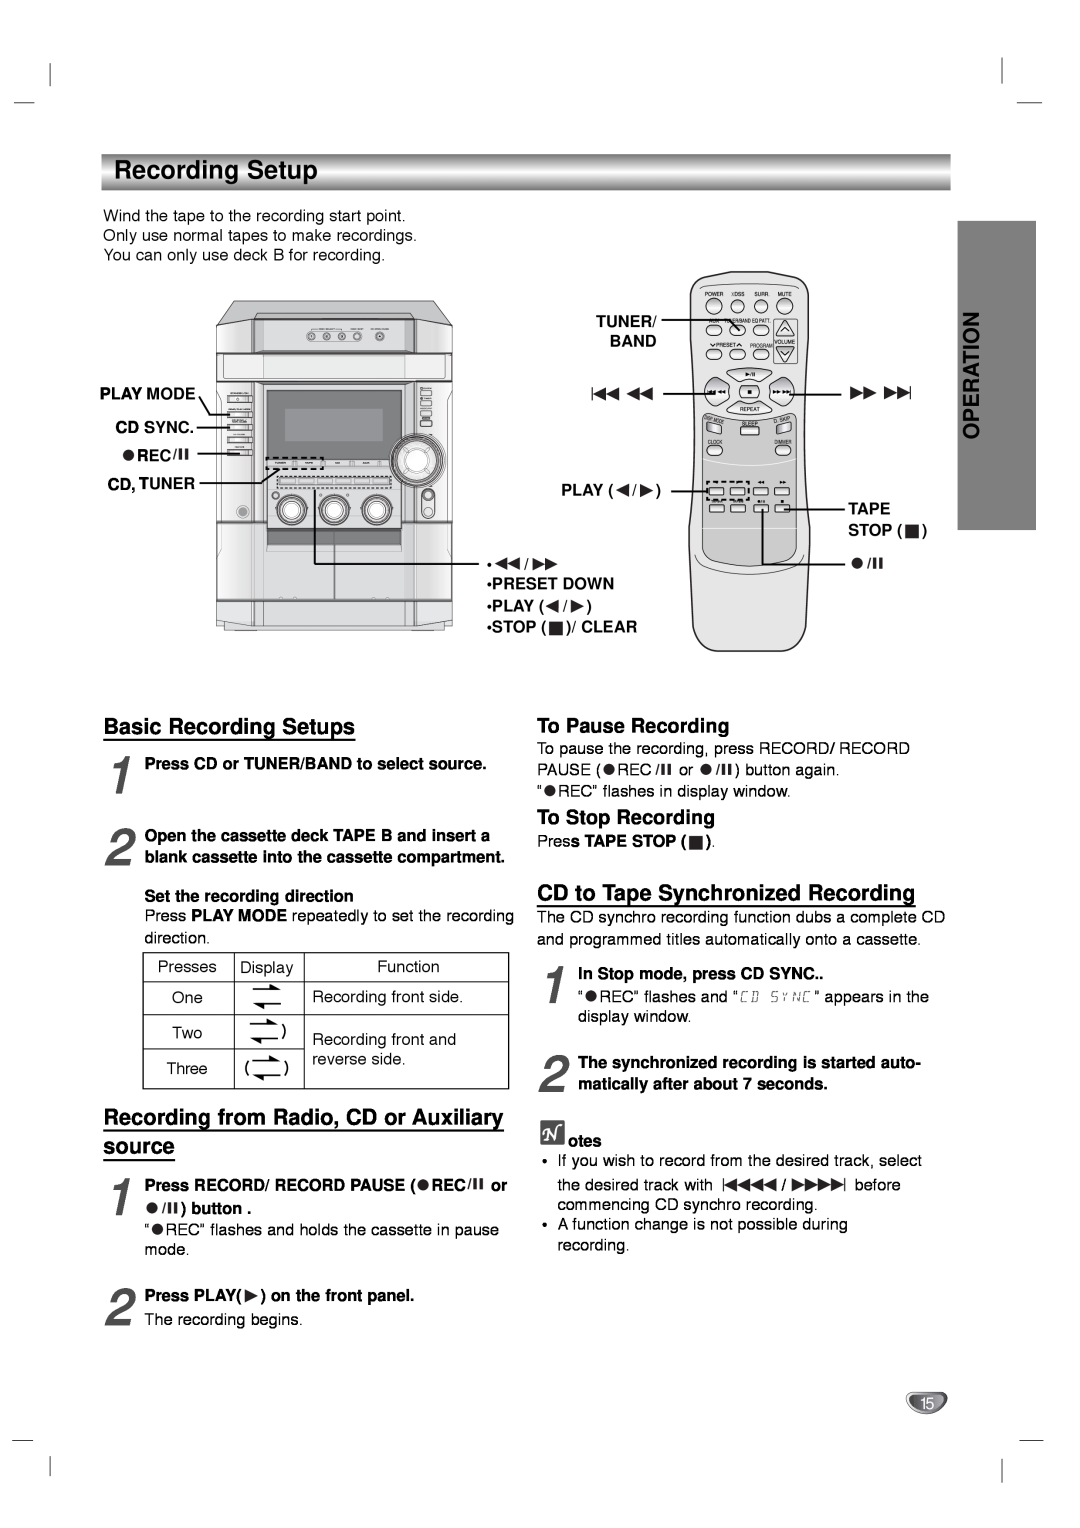 Zenith LMG340 Basic Recording Setups, Recording from Radio, CD or Auxiliary source, CD to Tape Synchronized Recording 